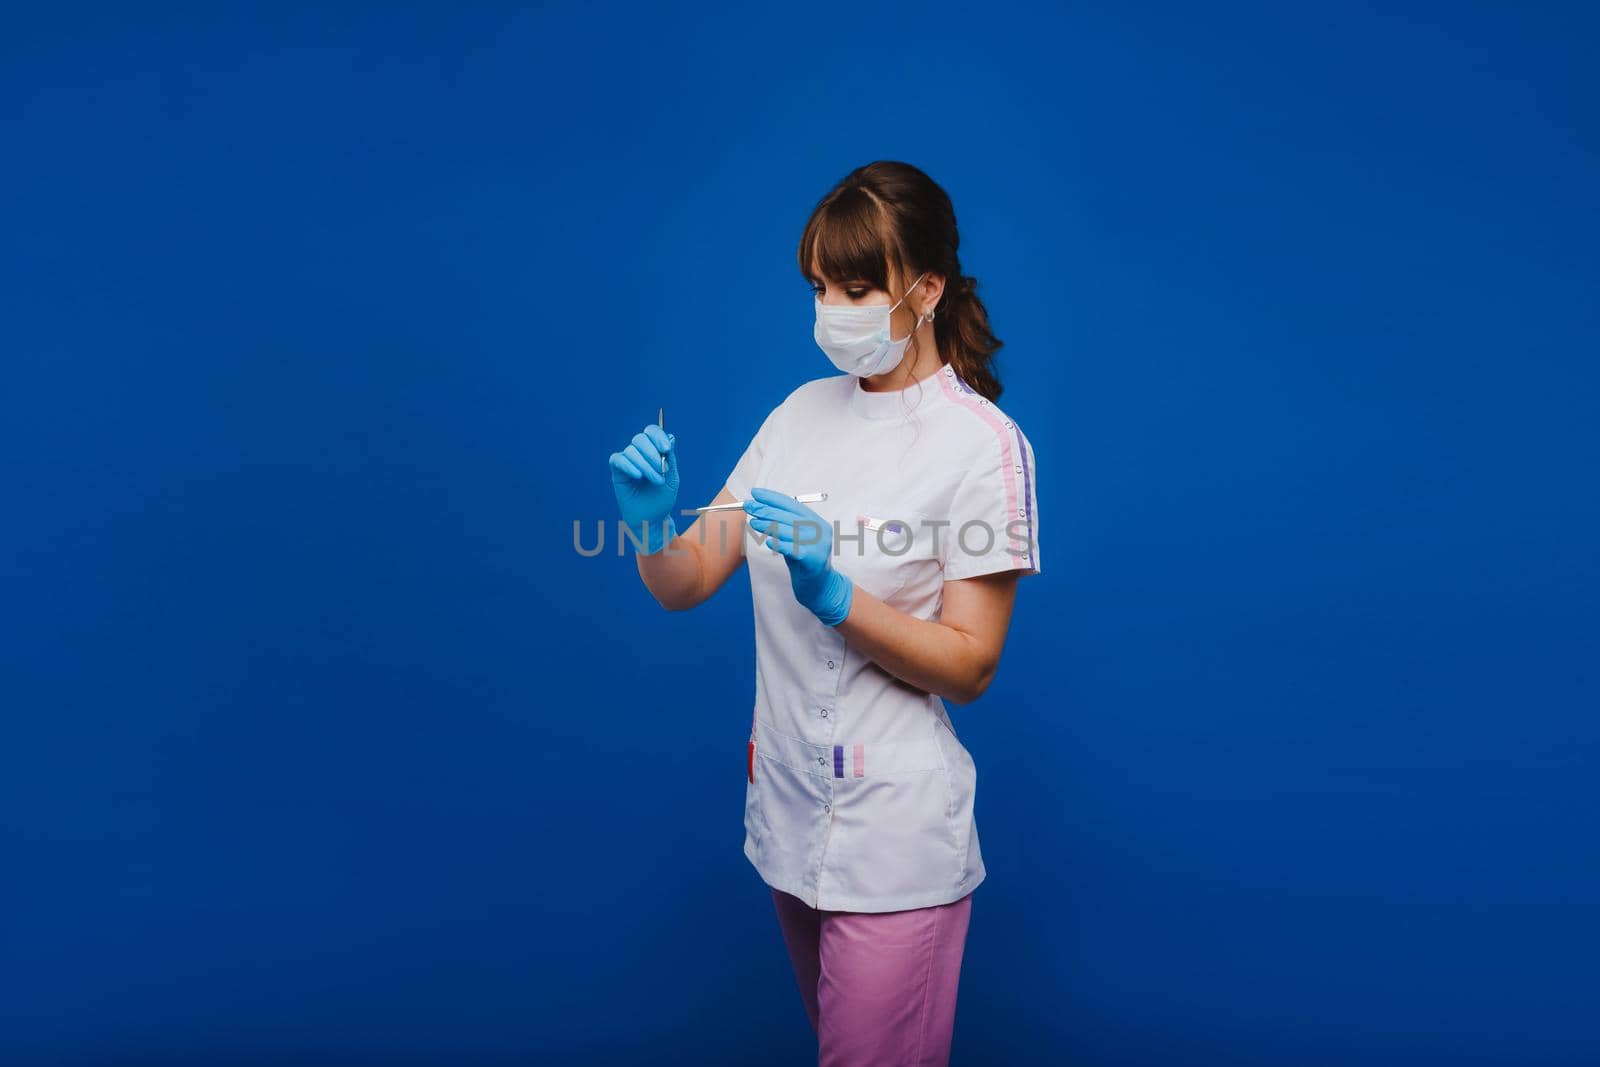 An attractive young female doctor holds a scalpel and looks directly at the camera. Concept of healthcare, treatment and surgery. Portrait of a medical practitioner on a blue background.